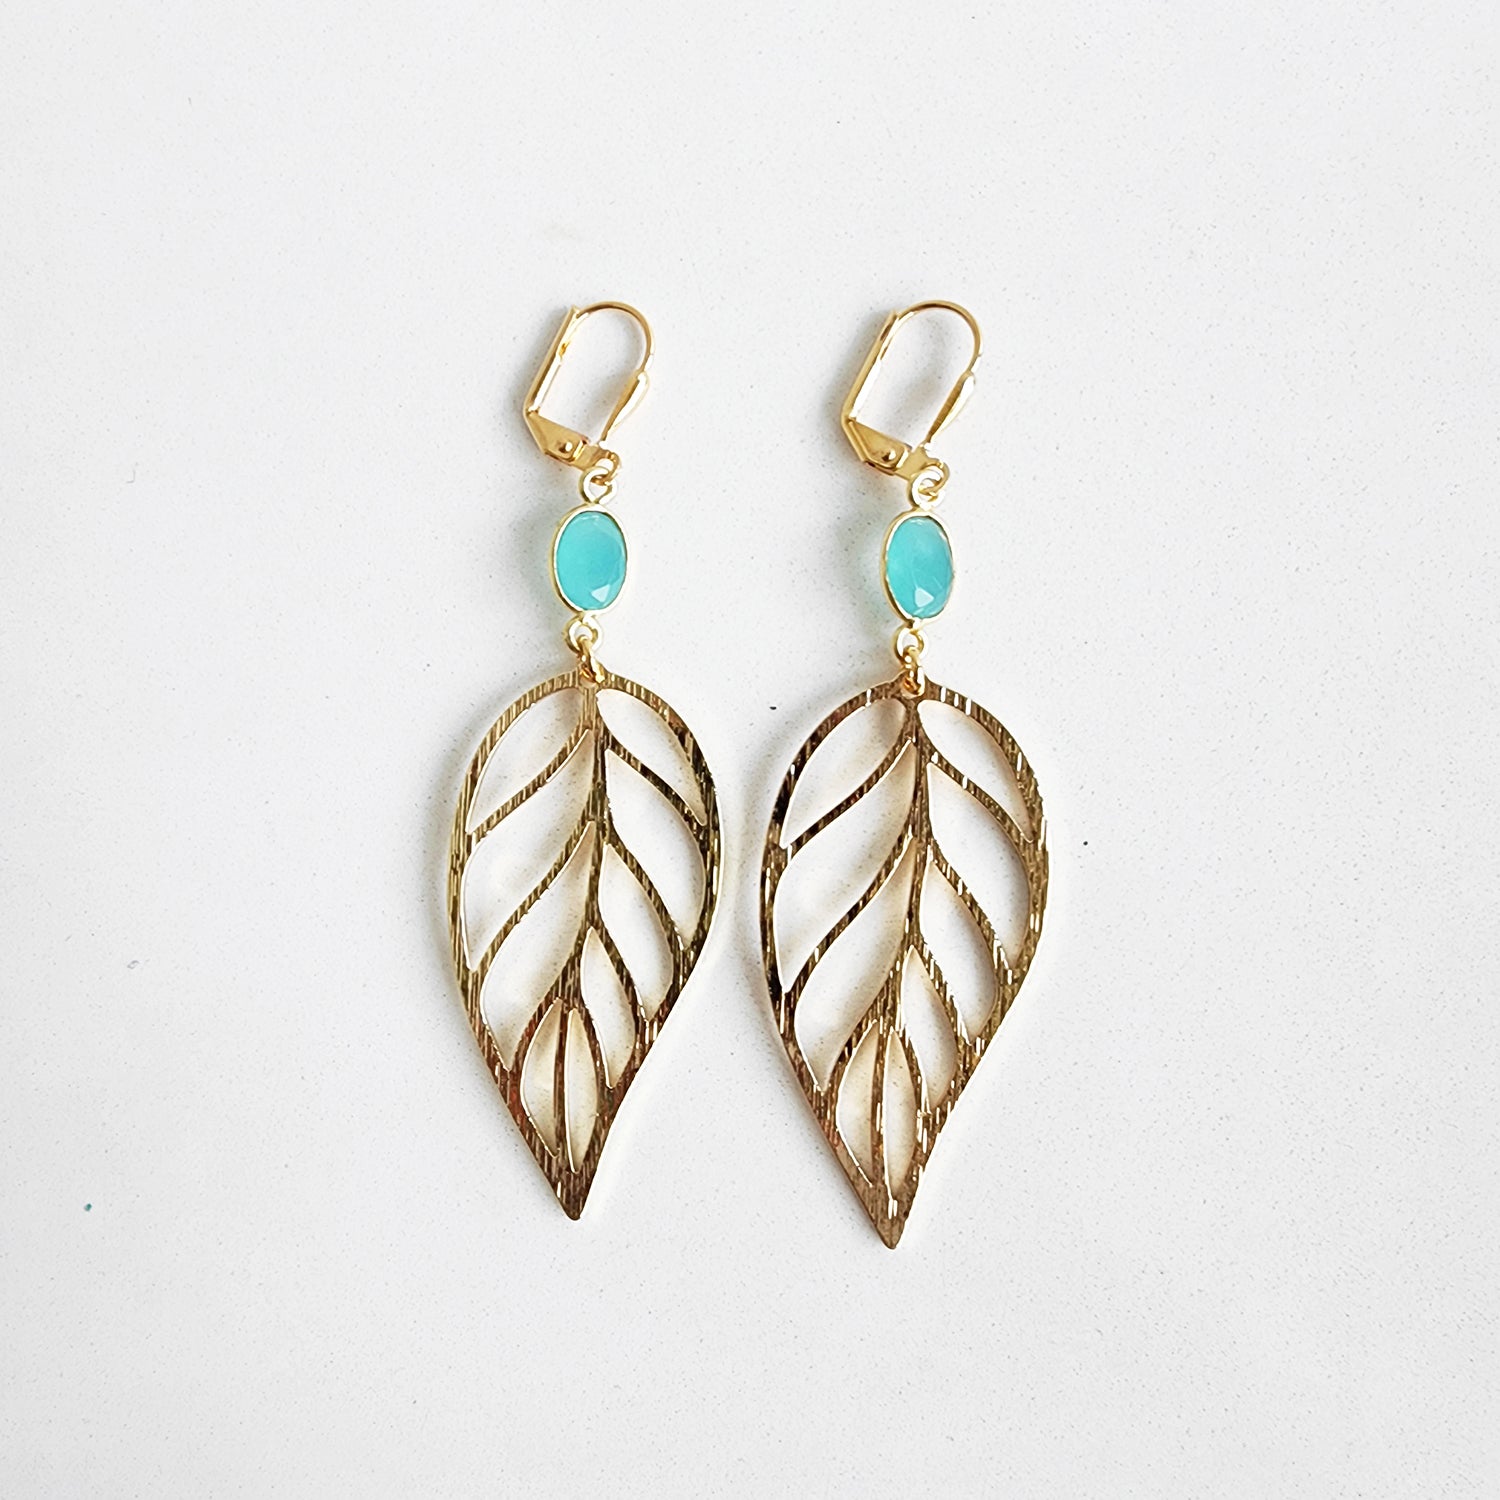 Turquoise Leaf Earrings – Picali Designs